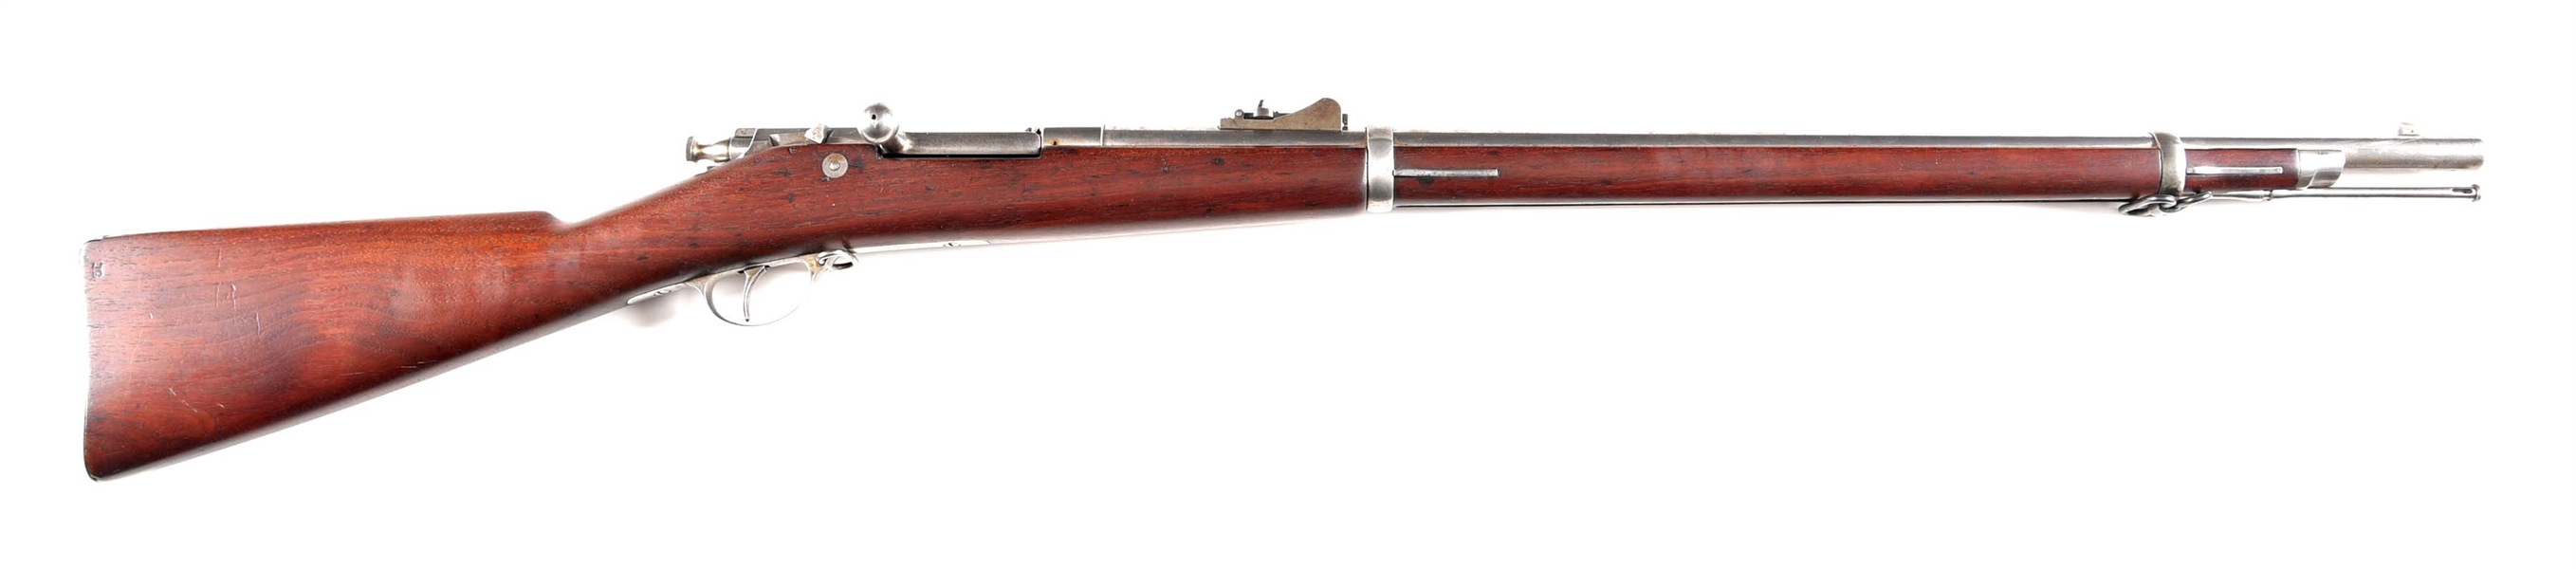 (A) WINCHESTER HOTCHKISS FIRST MODEL 1879 US NAVY BOLT ACTION RIFLE.